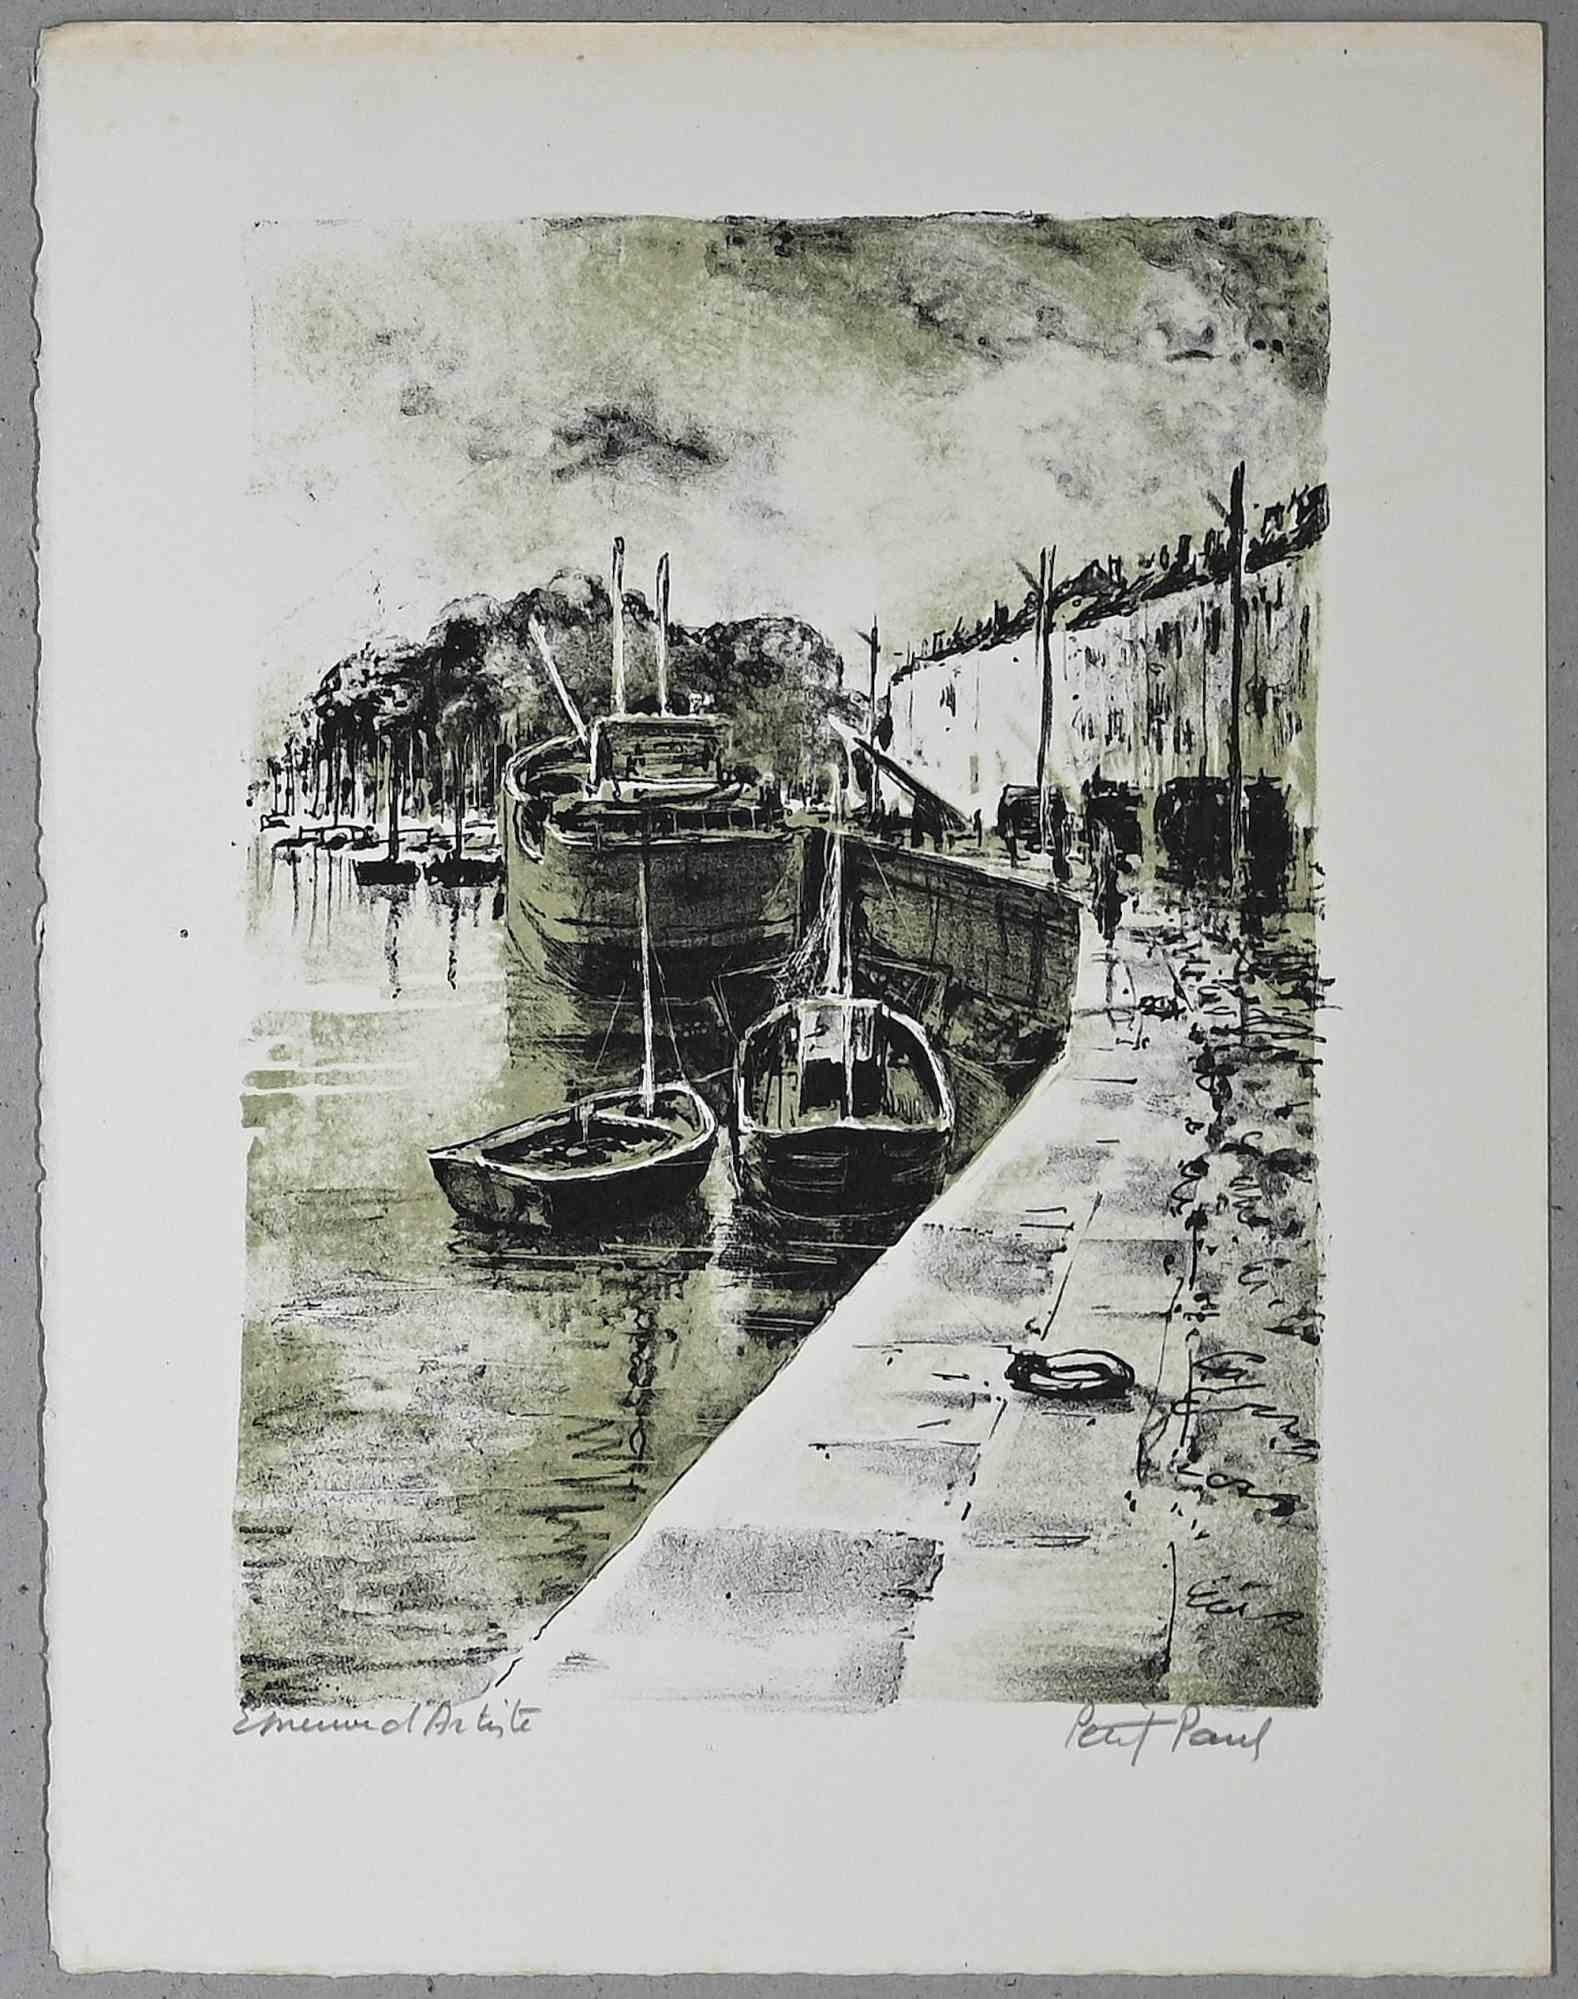 Harbor View is an original lithograph realized by Paul Petit in the mid-20th.

Hand-signed.

Artist's proof.

The artwork is depicted through confident strokes in a well-balanced composition.